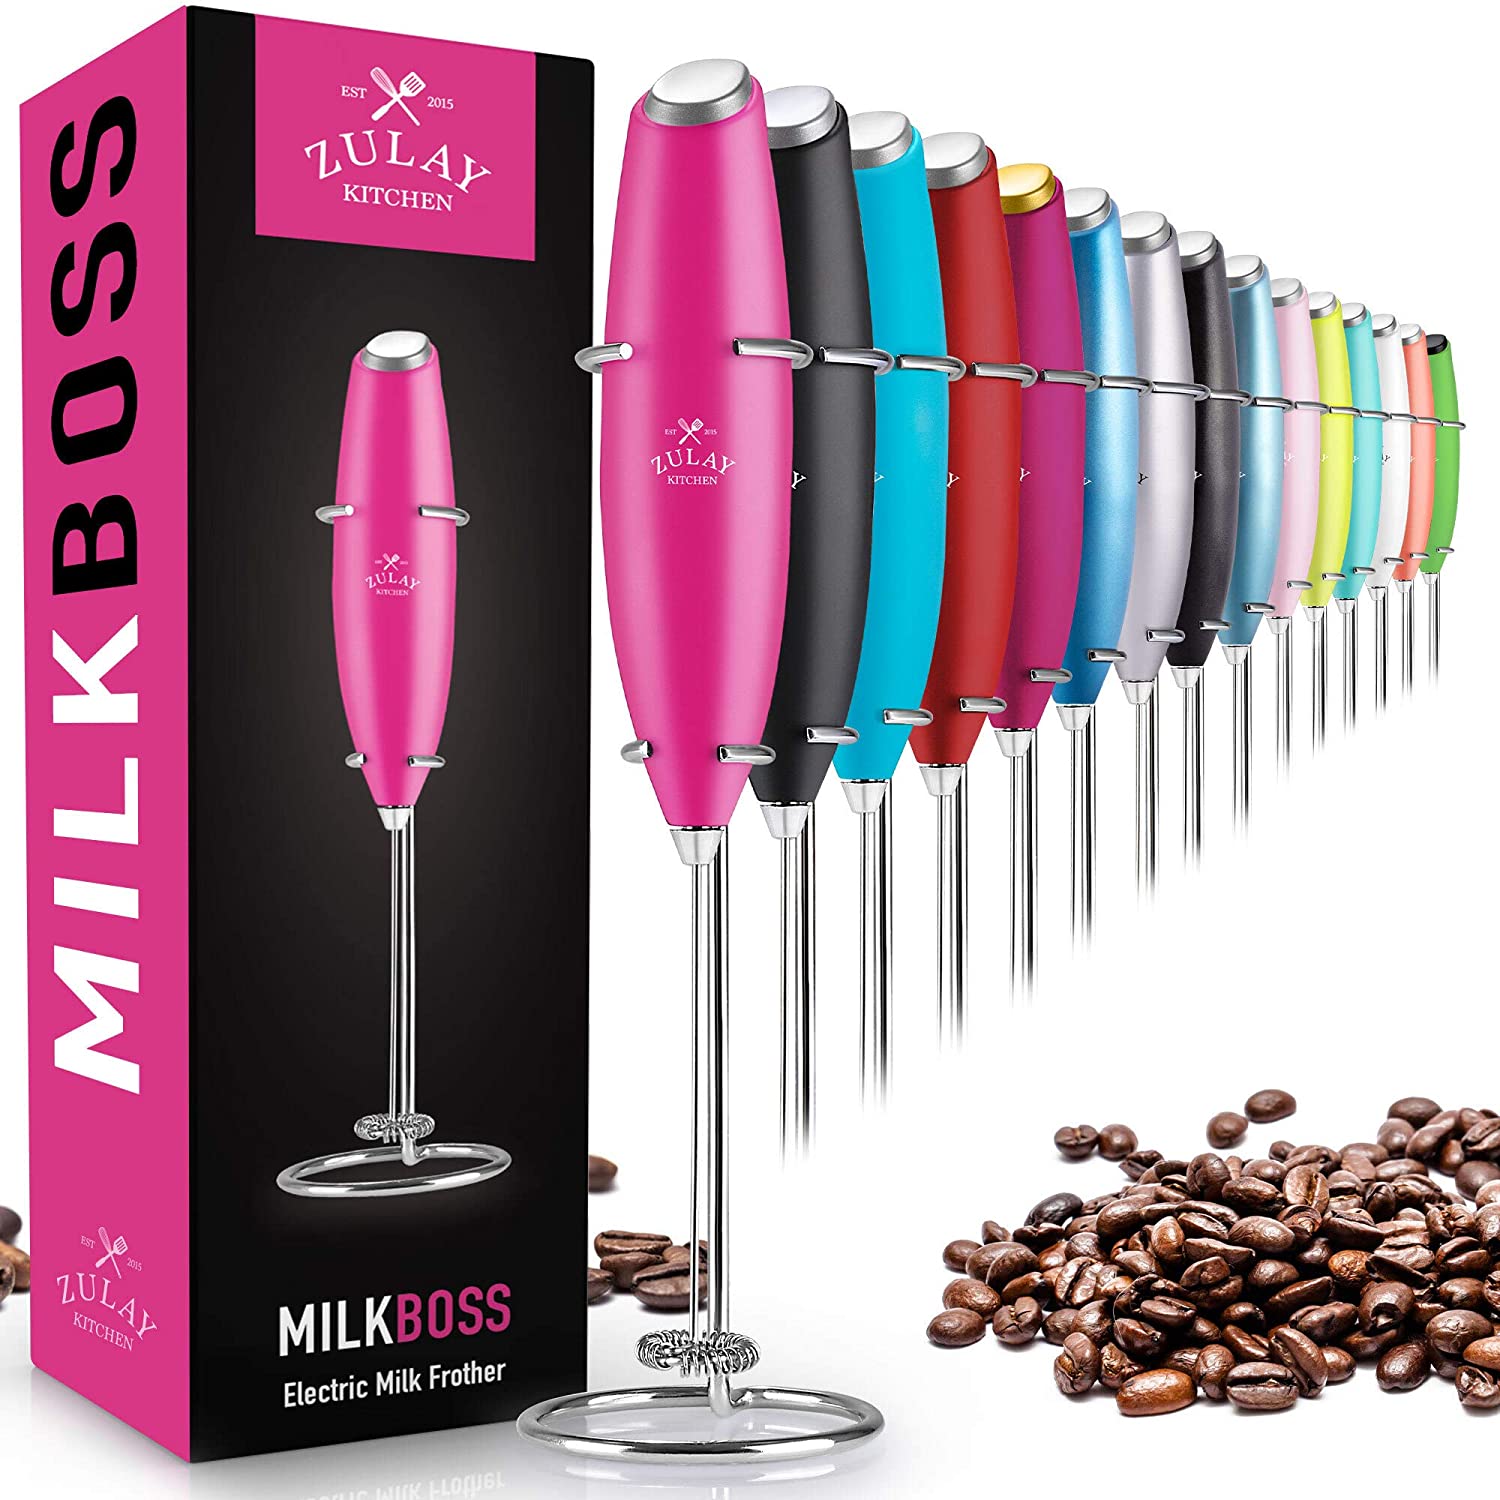 Zulay Kitchen Milk Frother Review - Is It Worth It? - The Global Ghana Girl